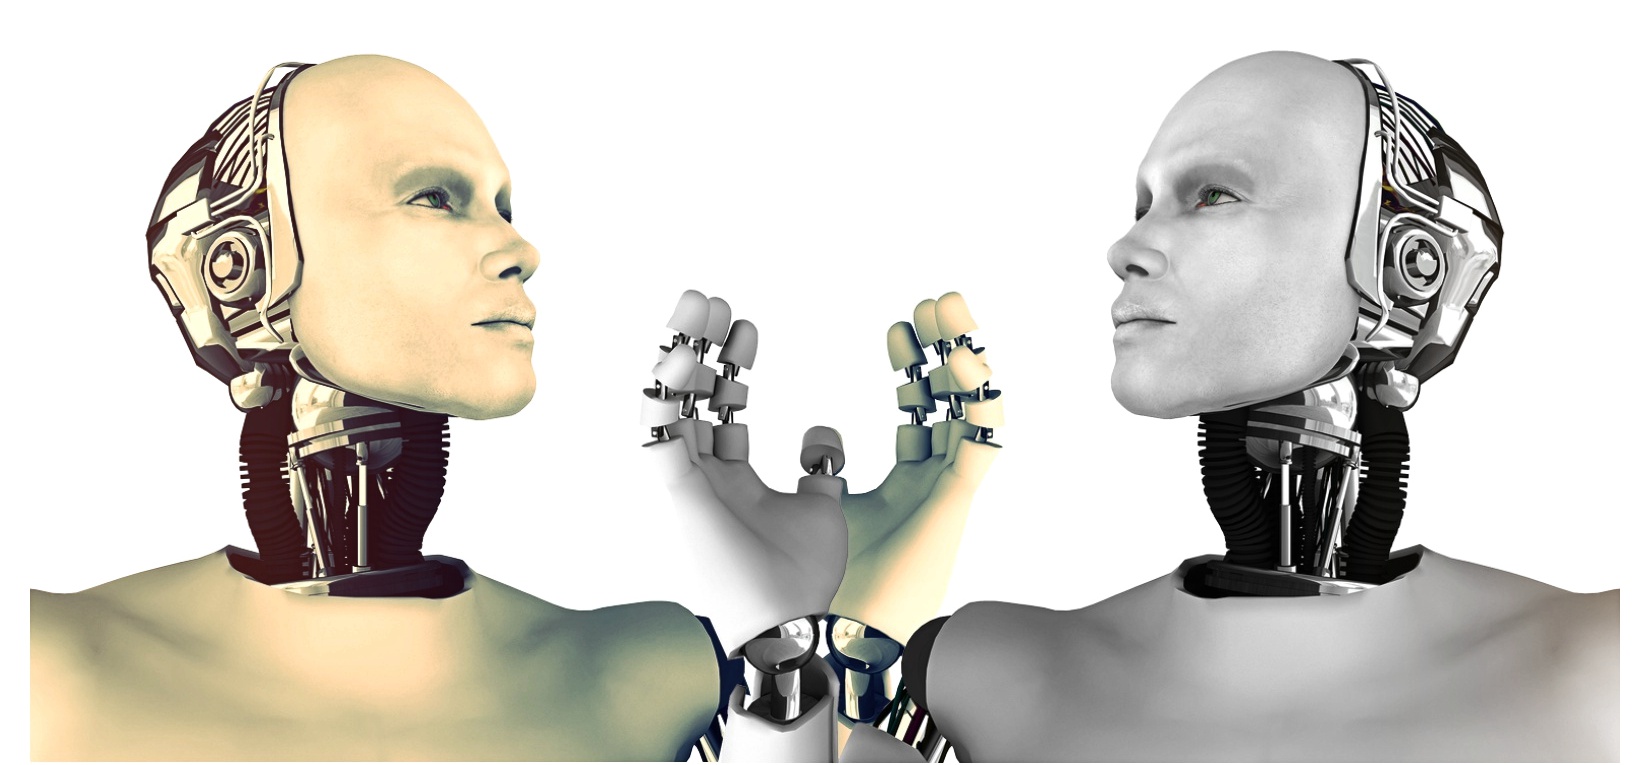 Scientists Working on Robots Equipped with Self-Cloning Capabilities